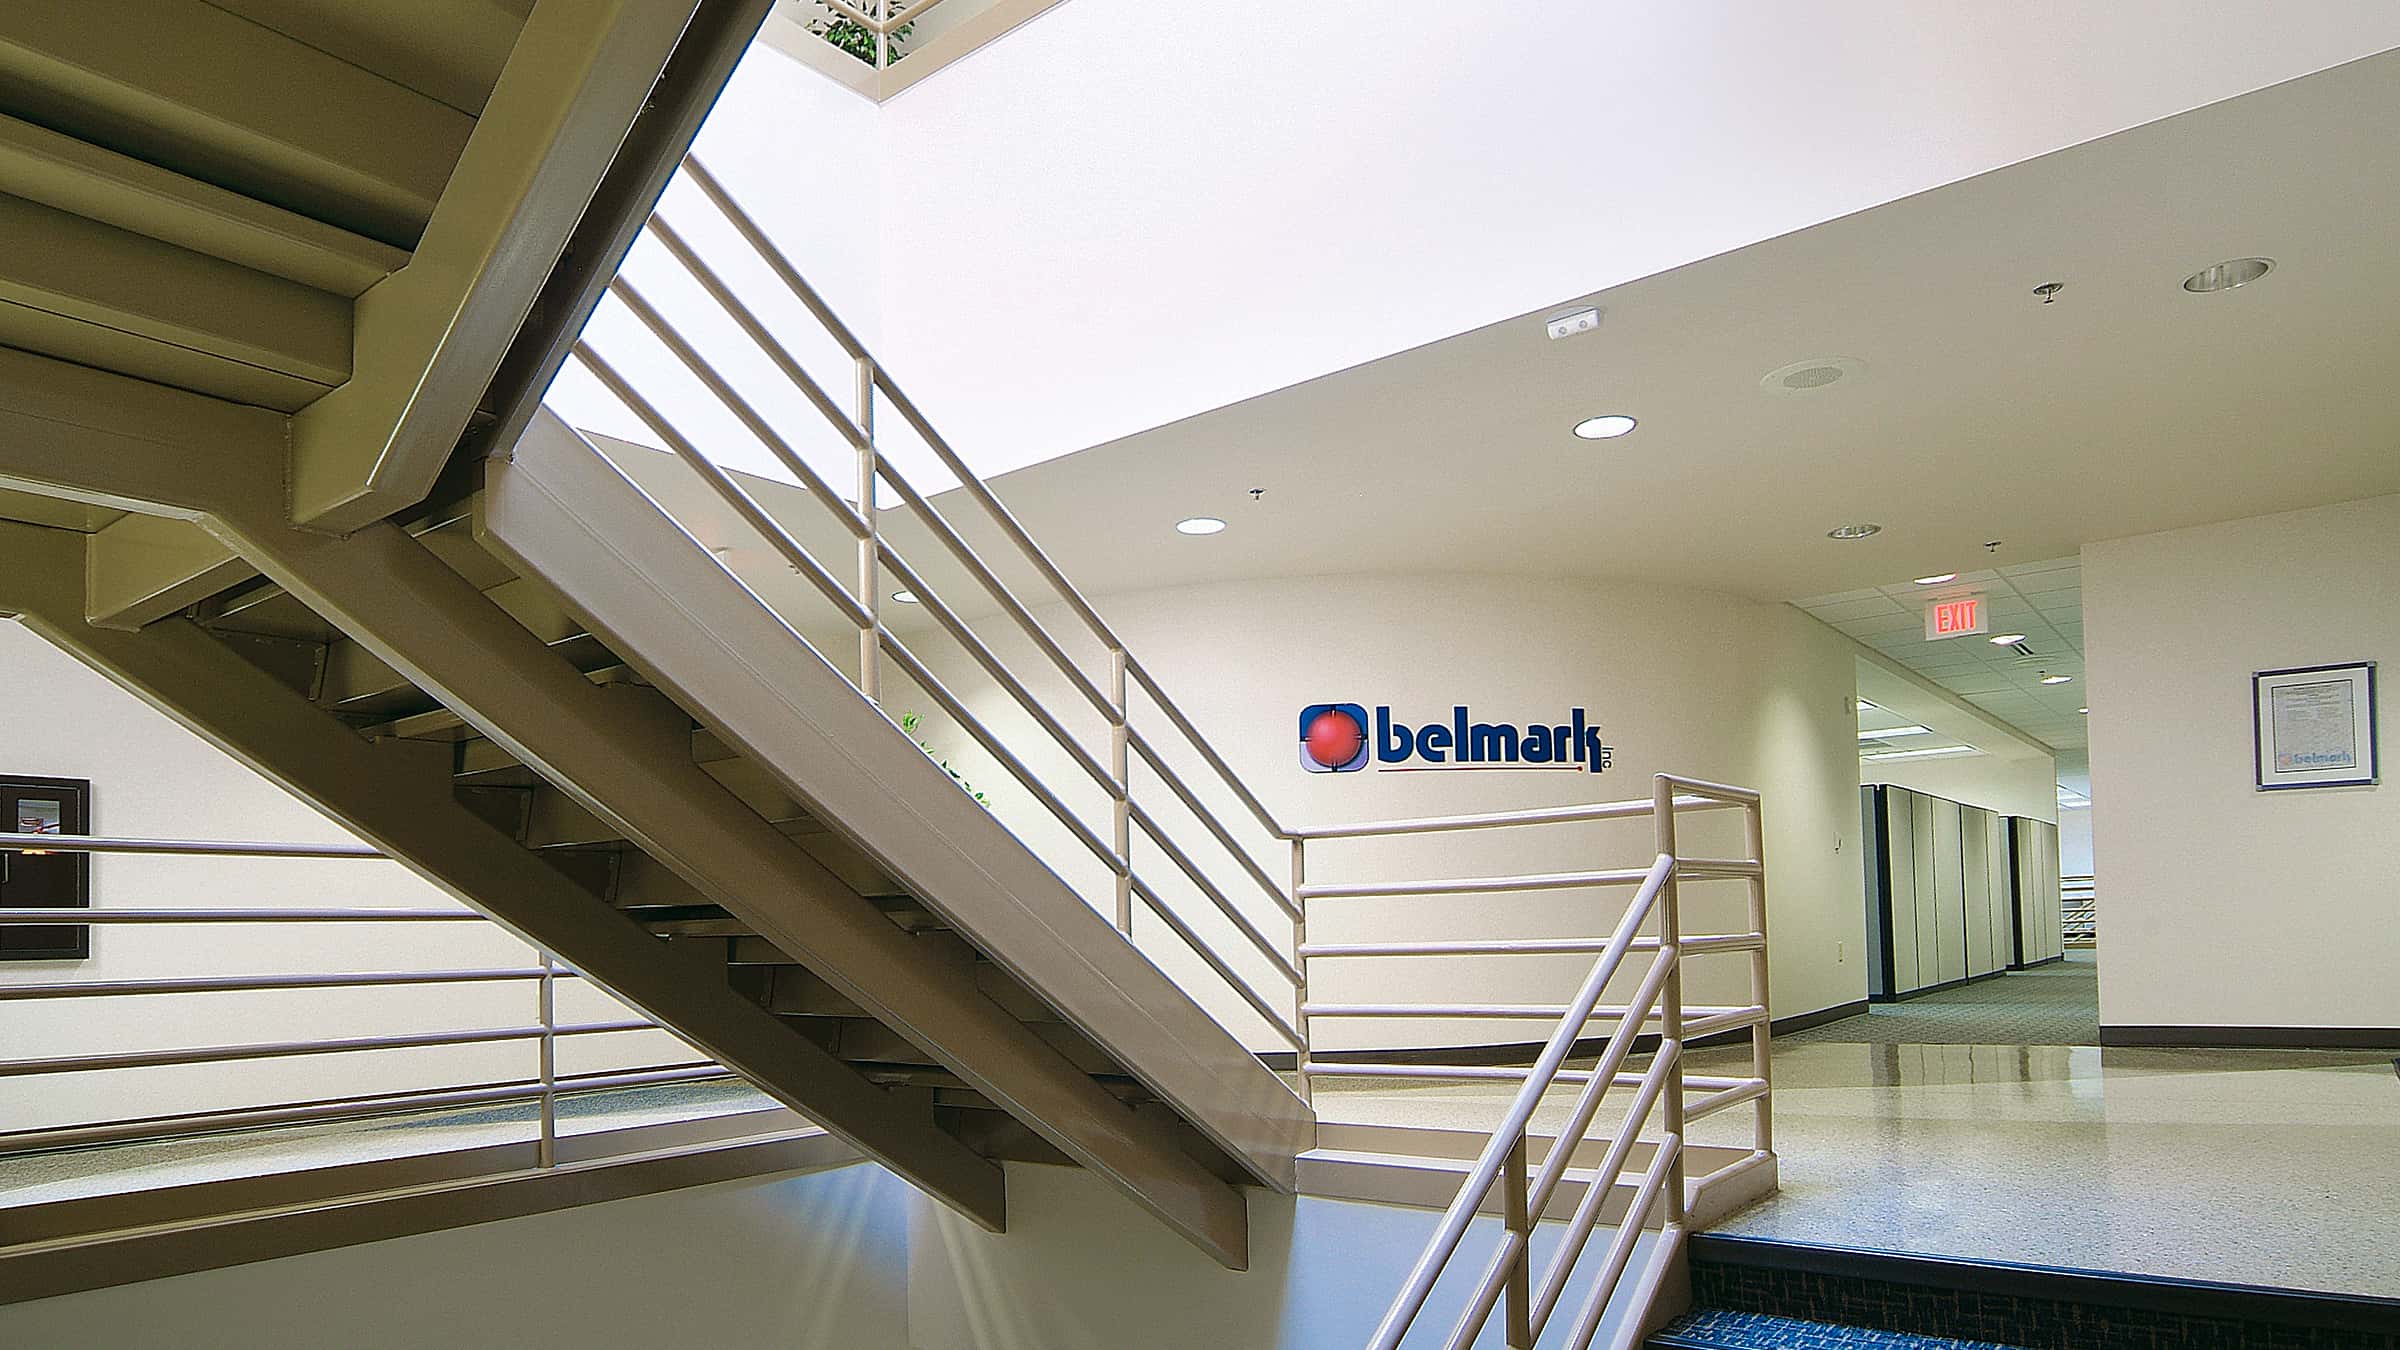 Belmark Office and Manufacturing Facility - Interior with Signage